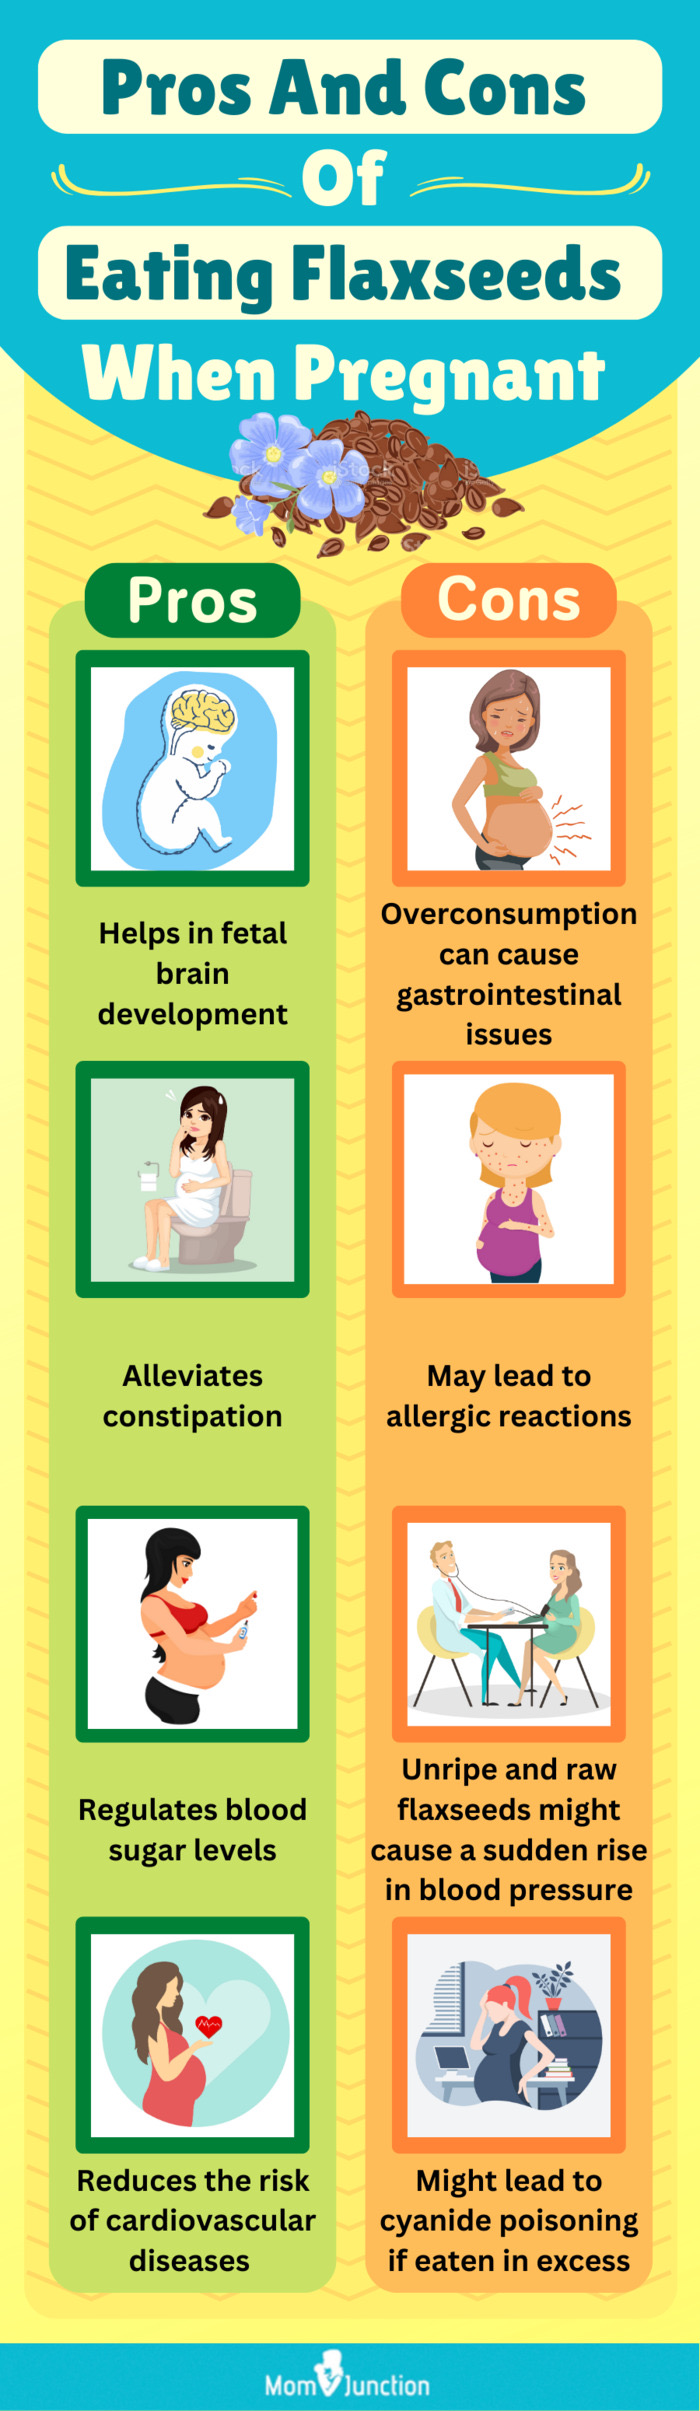 pros and cons of eating flaxseeds when pregnant (infographic)